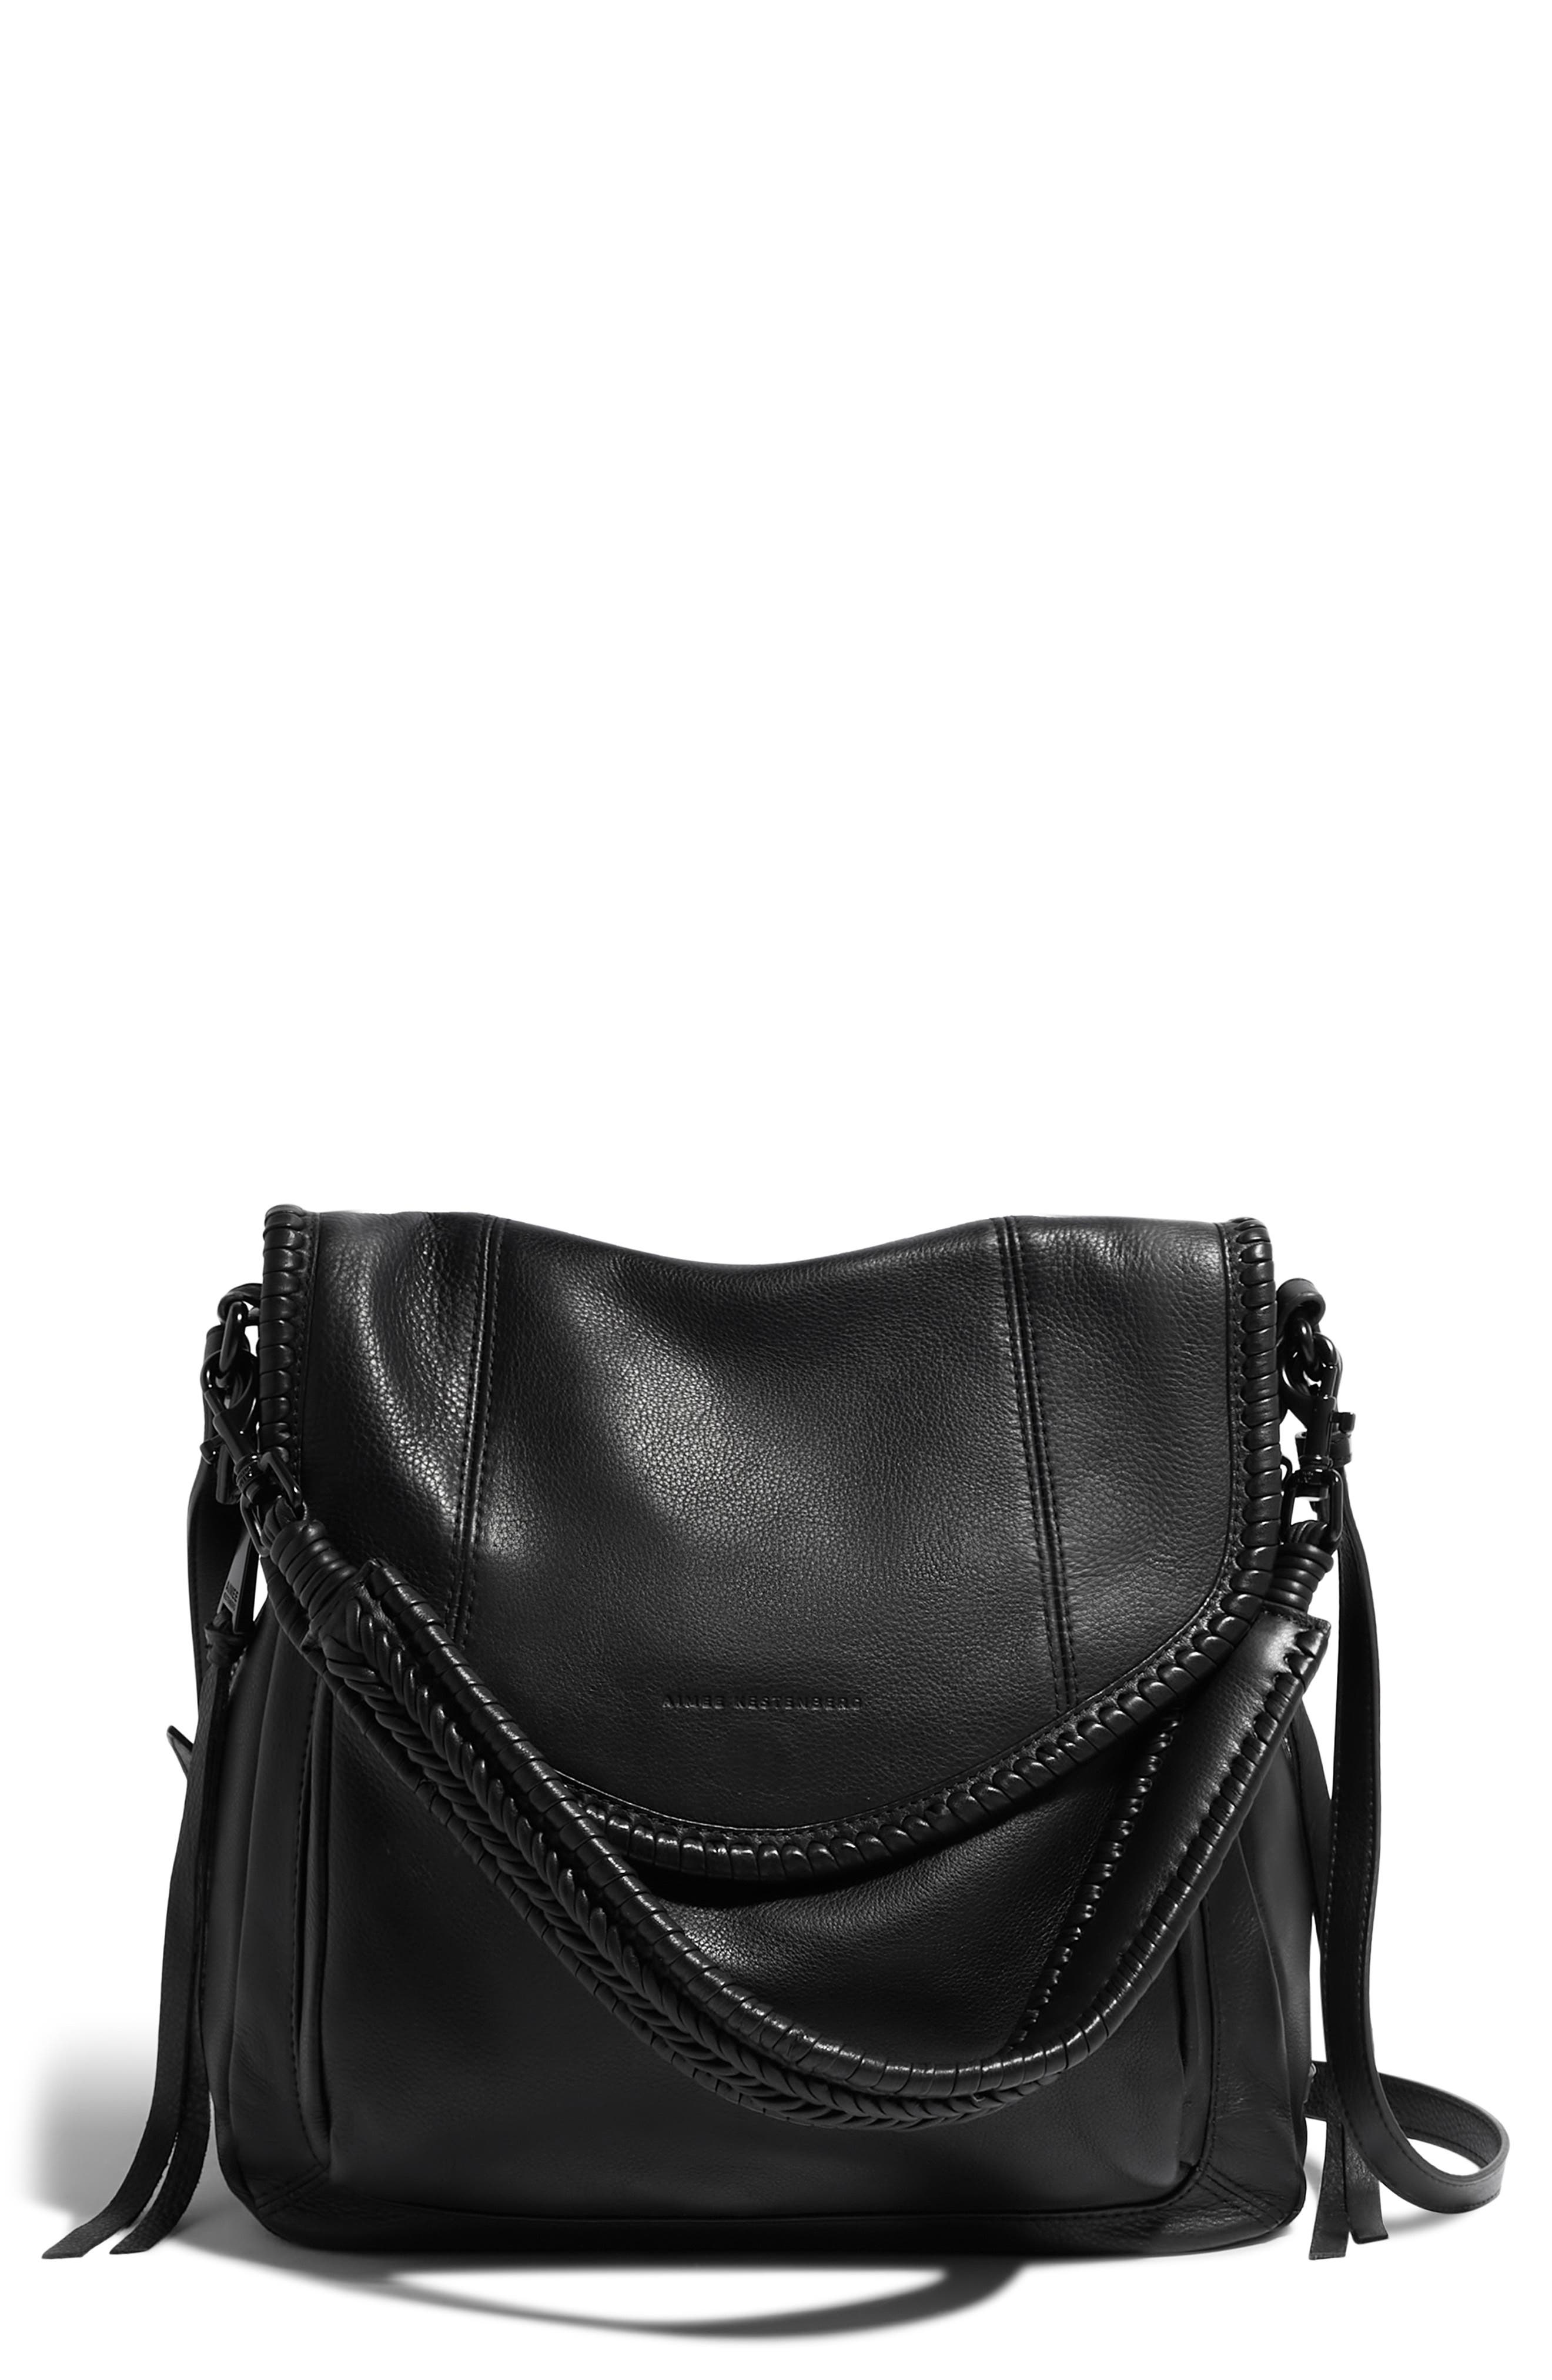 Soft Leather Flap over Shoulder Bag Cross Body Black with Many Features 